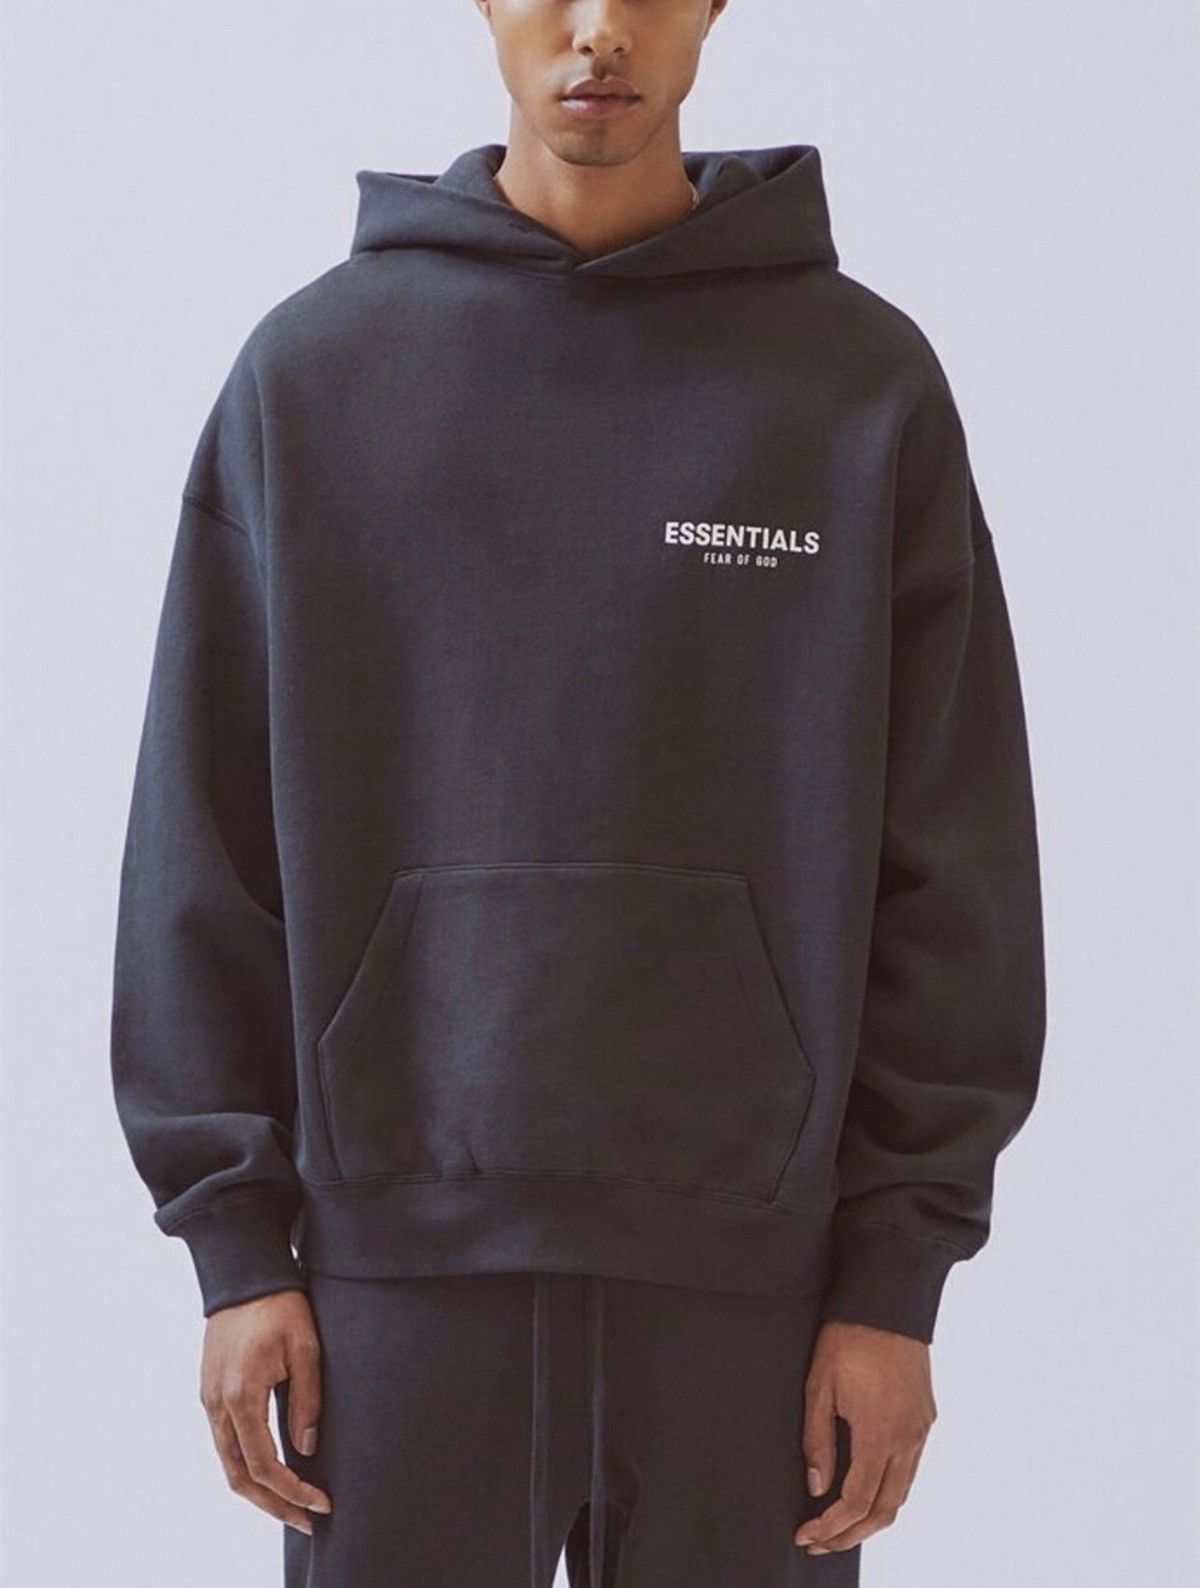 Fear of God Essentials x Fear of God Photo Hoodie Size US M / EU 48-50 / 2 - 2 Preview